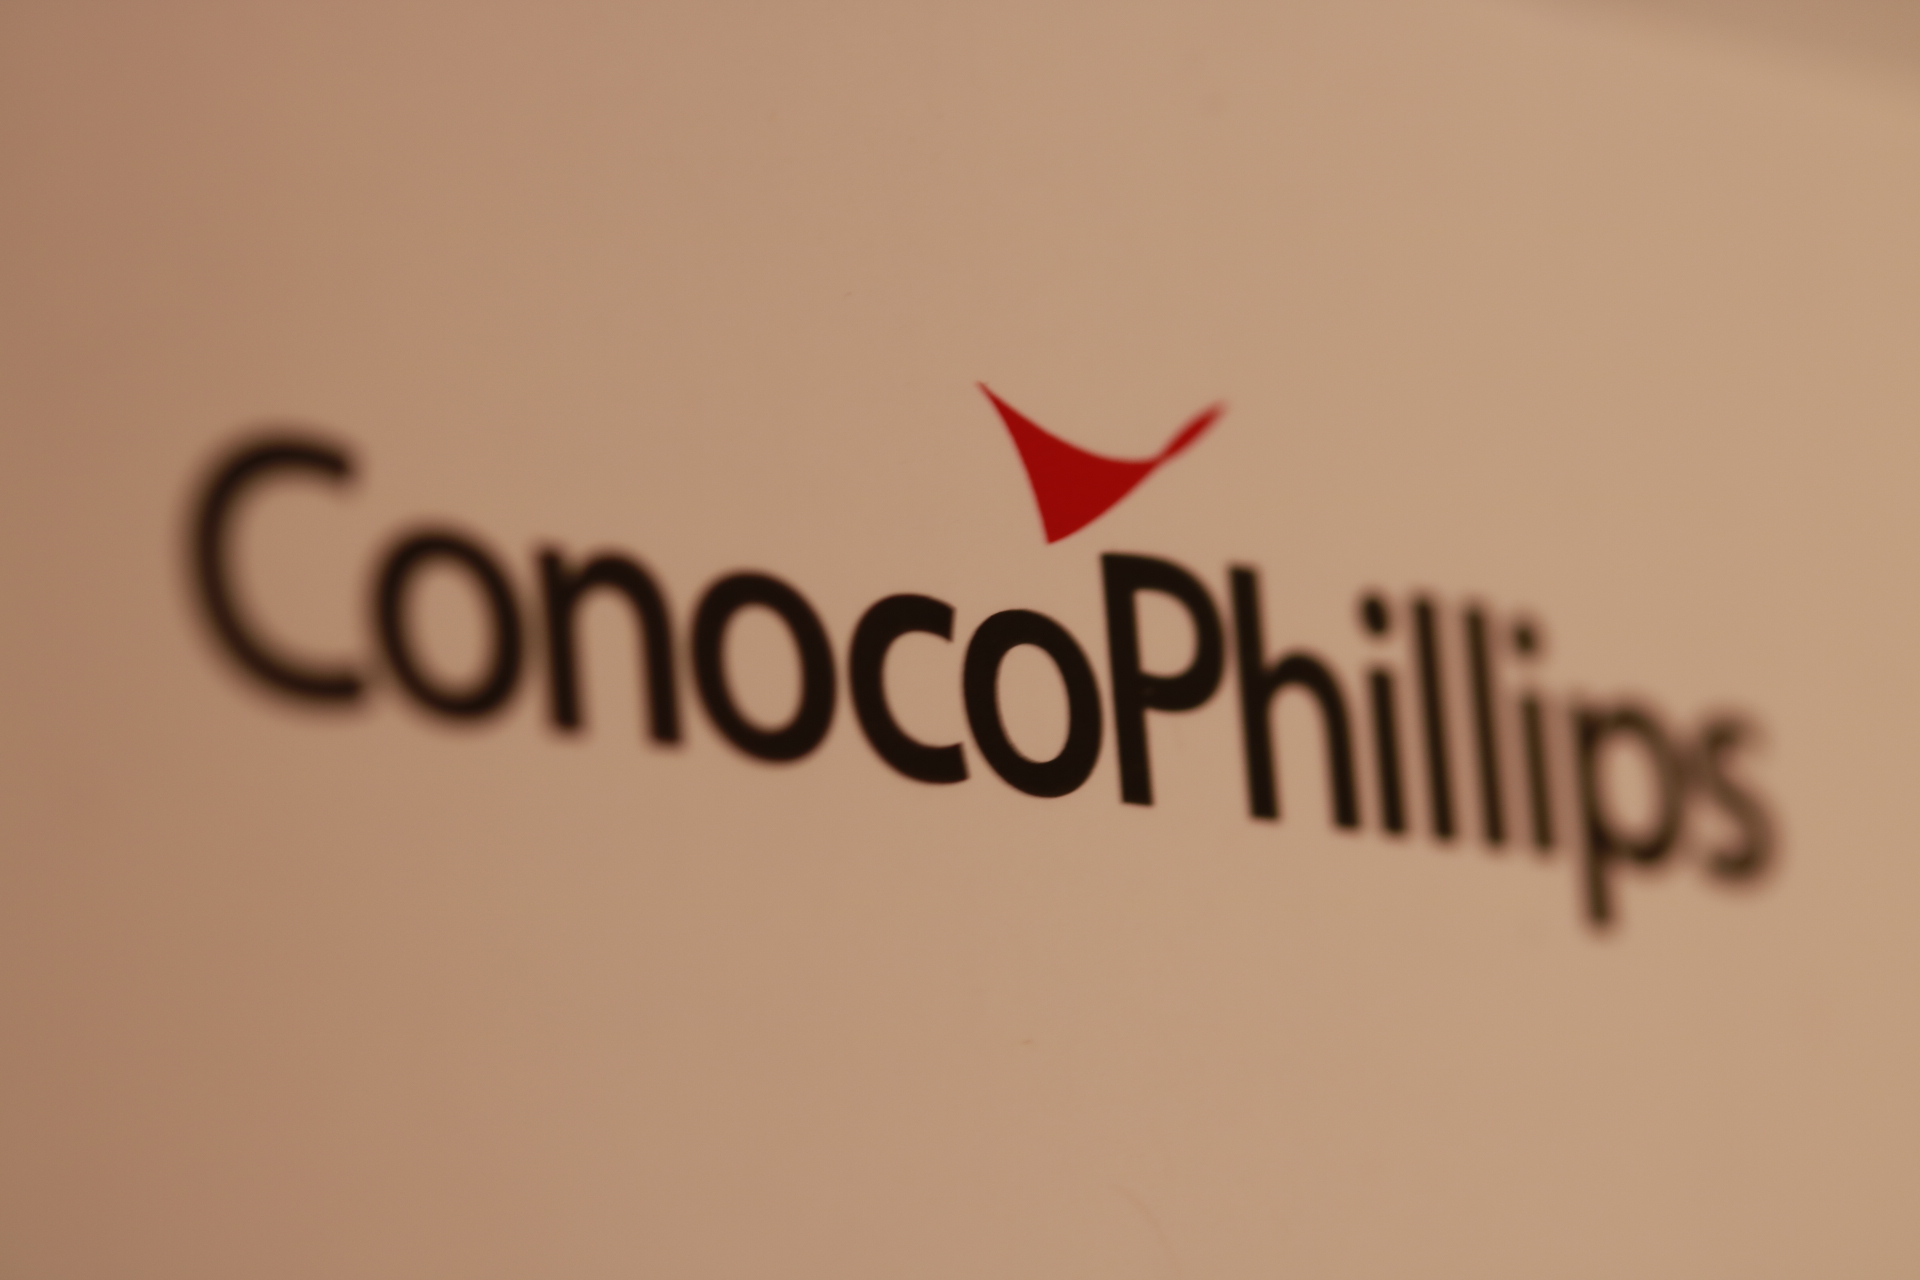 ConocoPhillips hikes dividend by 37.7%